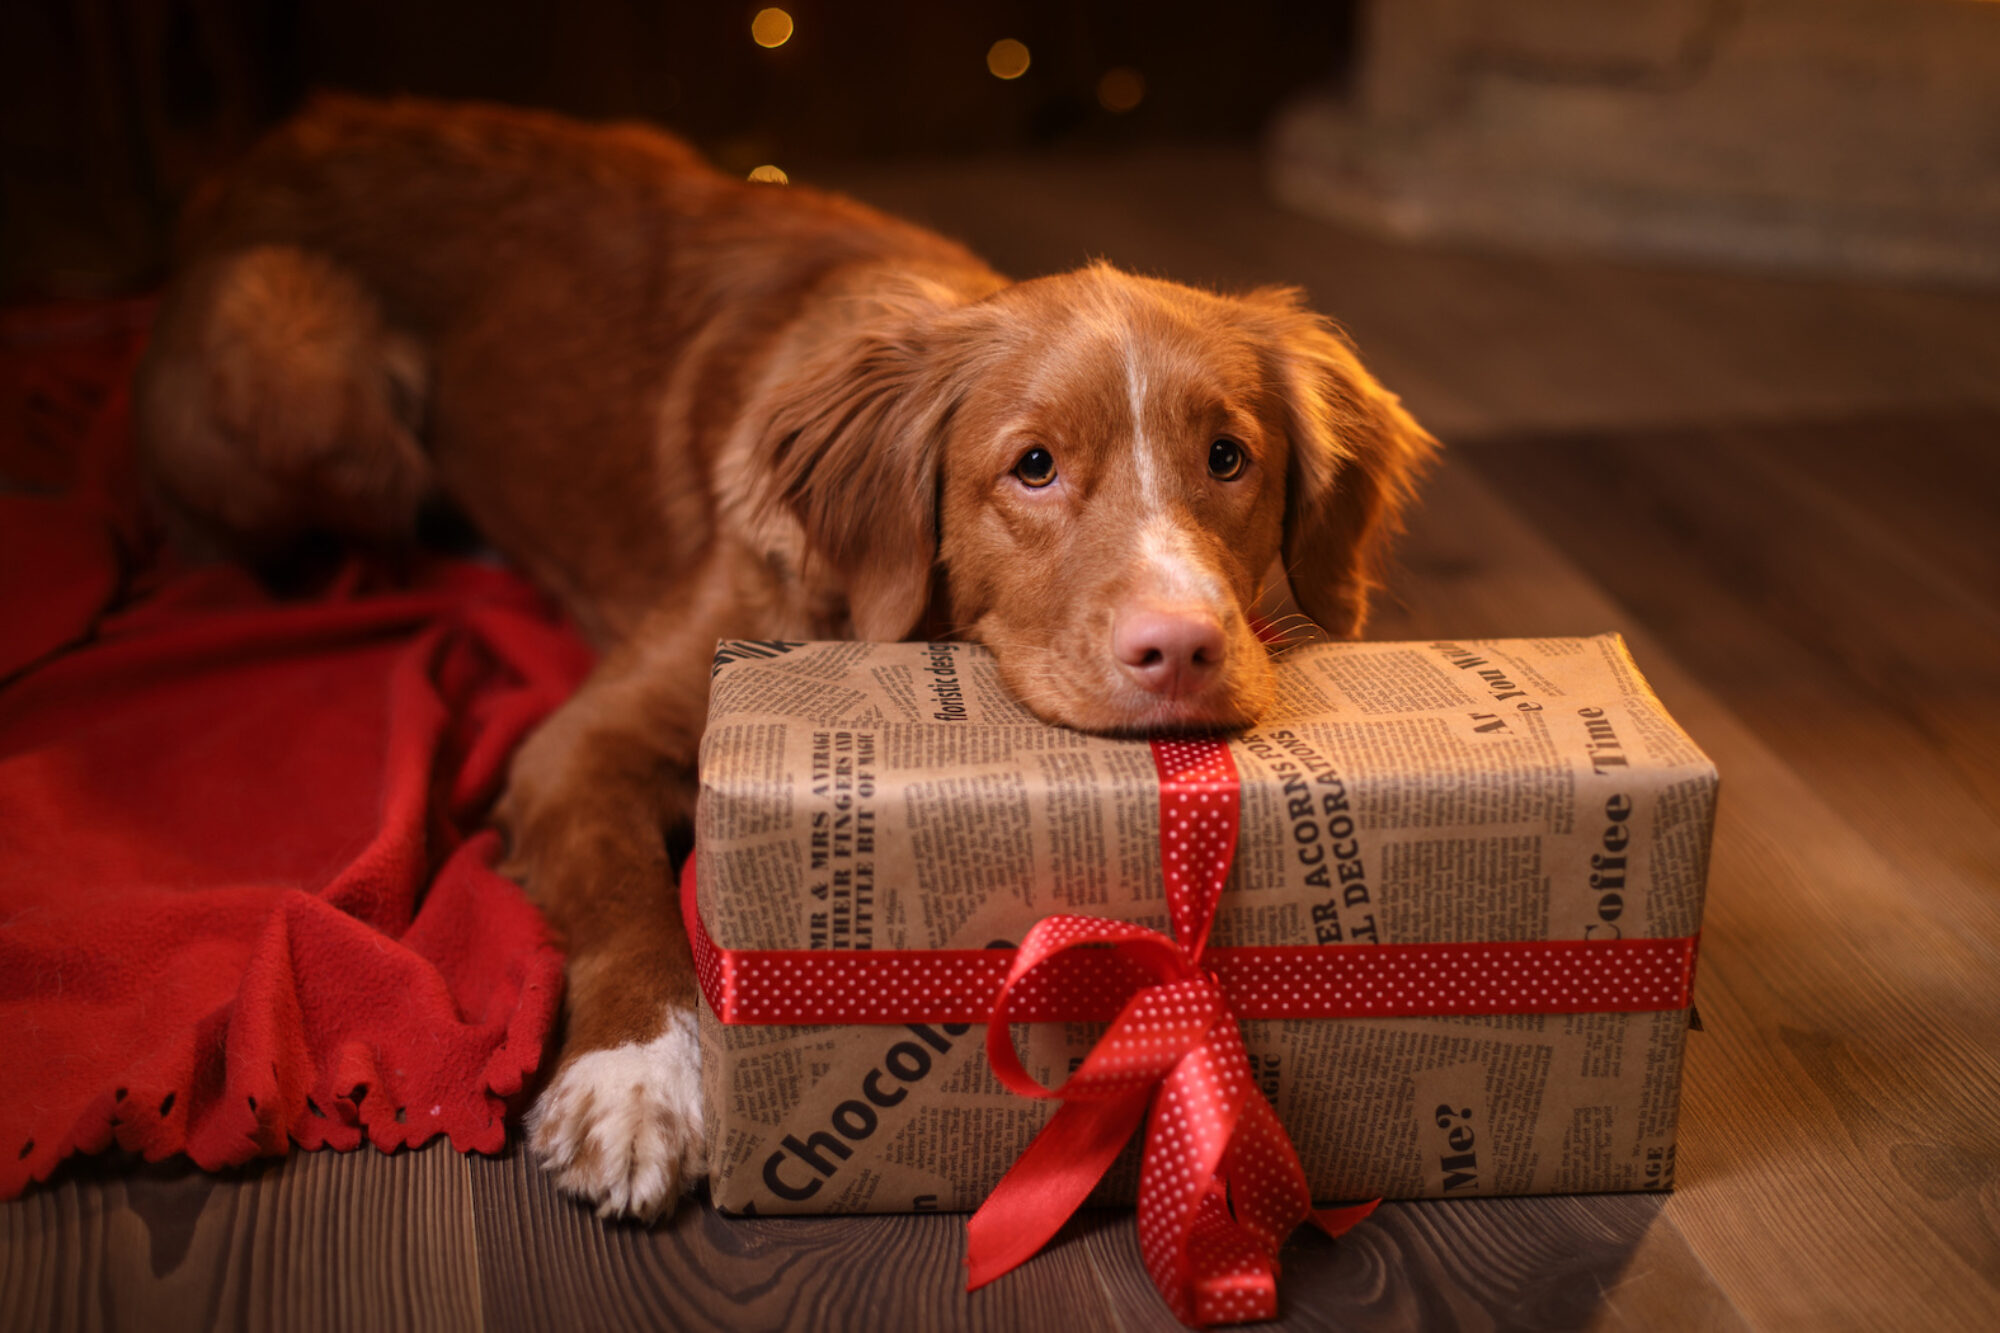 Dog Christmas presents: A list of 12 gift ideas for your dog